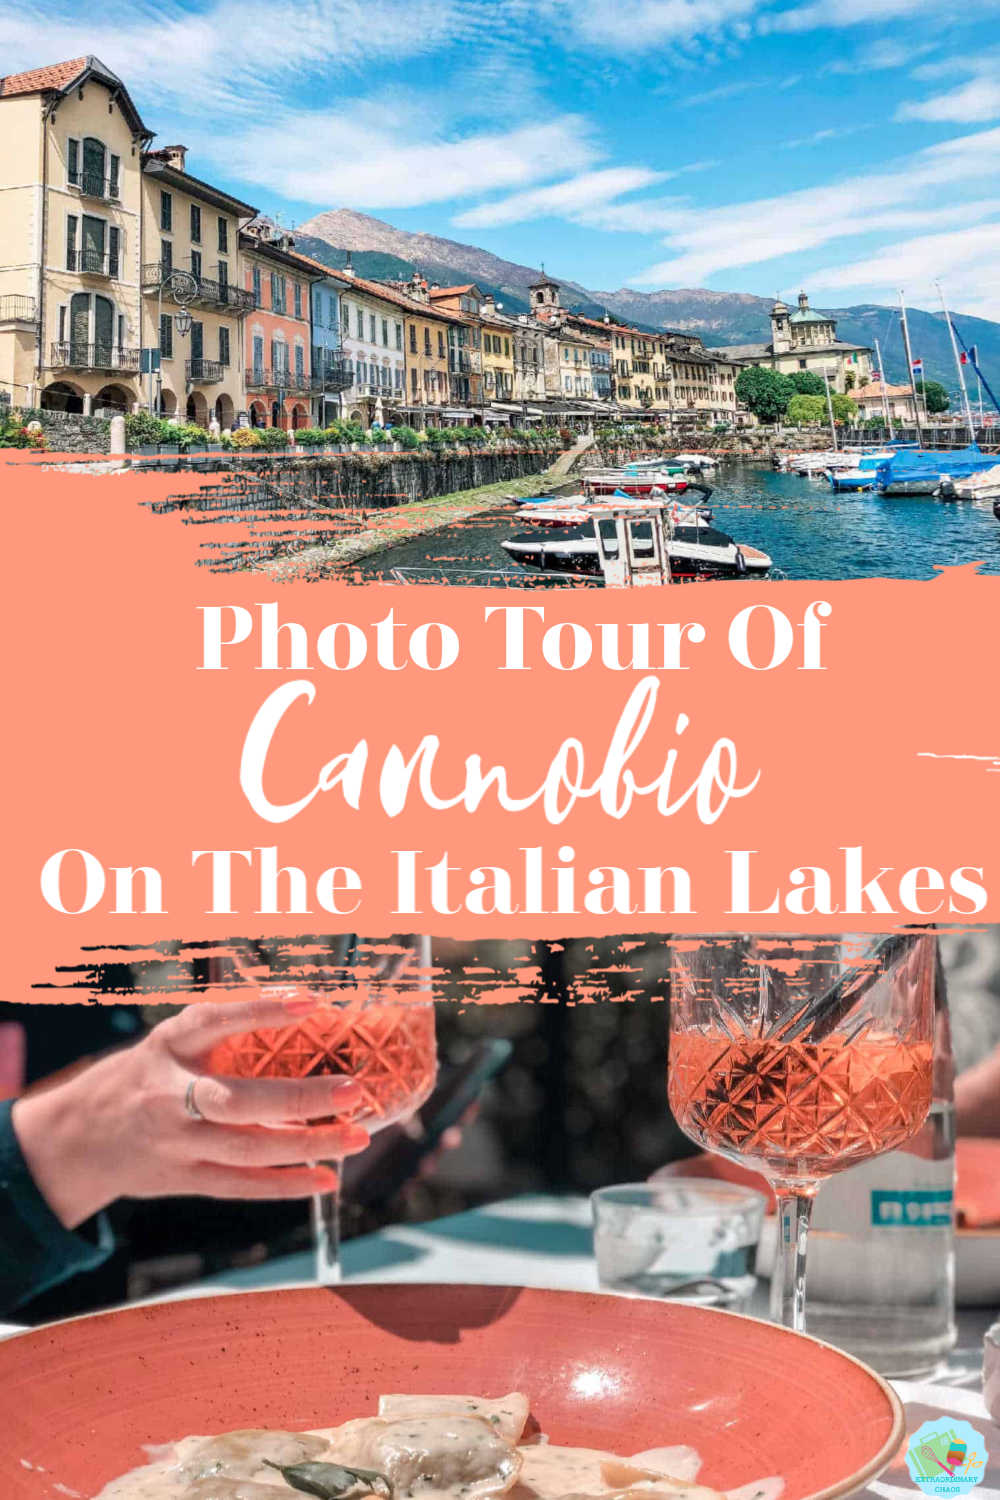 Cannobio is on Lake Maggiore in Italy a photo tour of the Island